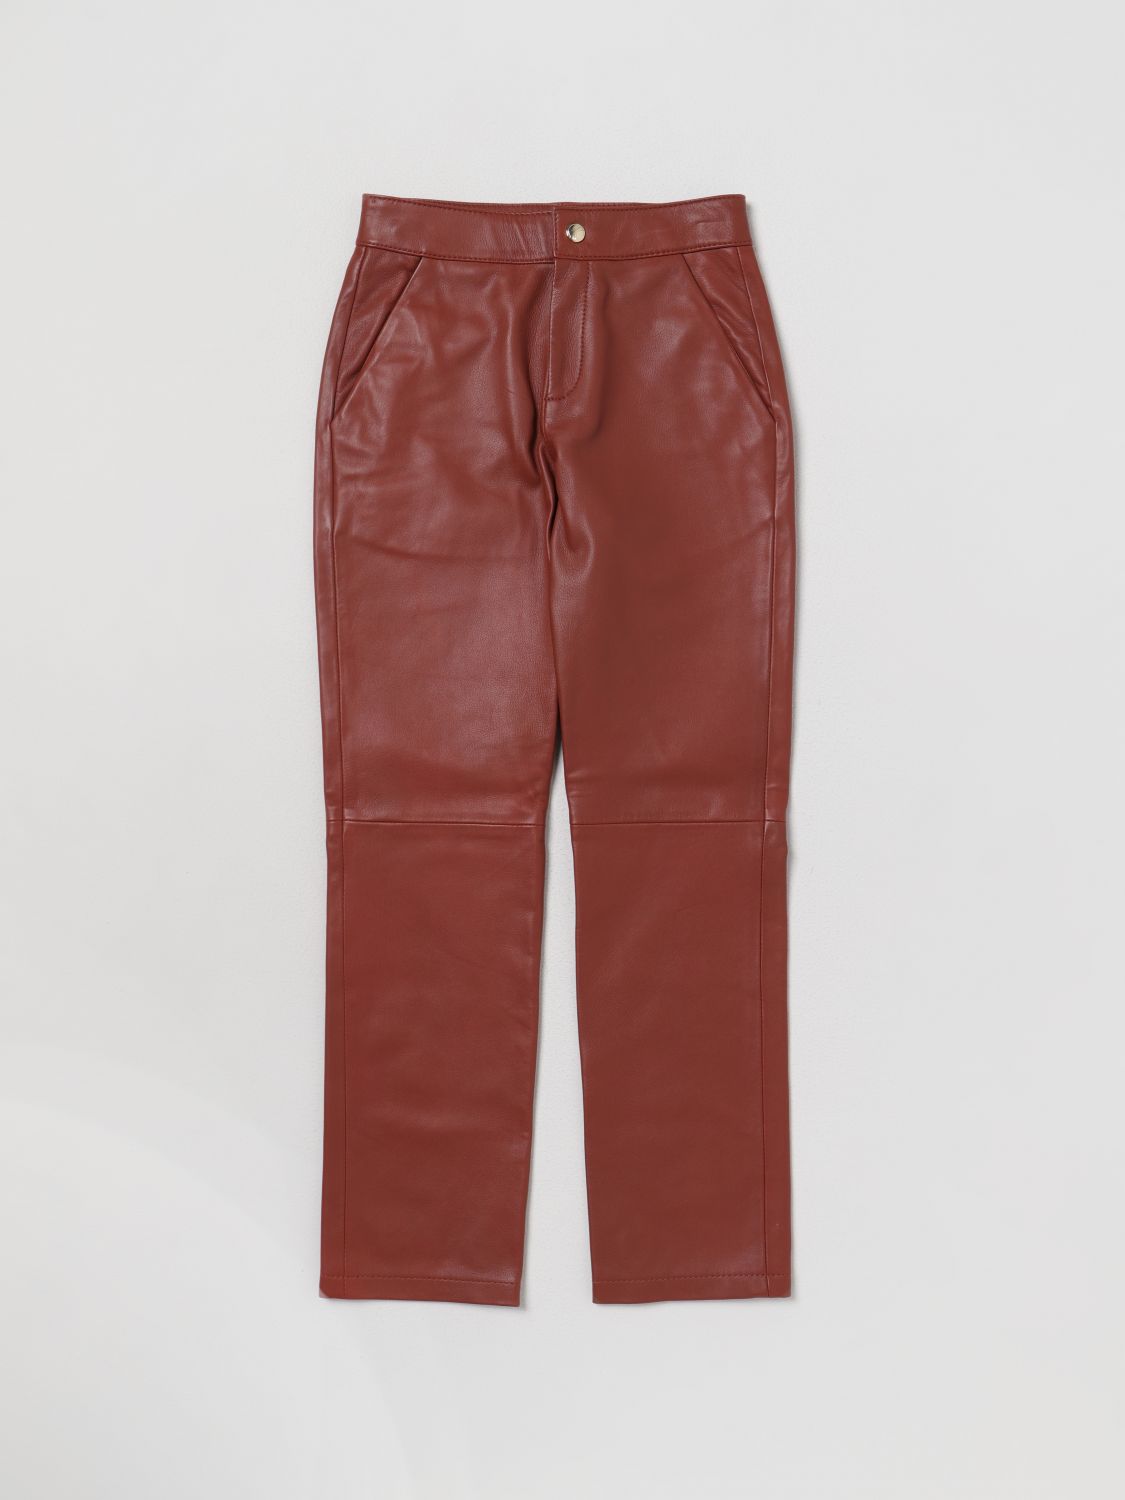 Chloé Kids' Leather Pants With Pockets In Burgundy